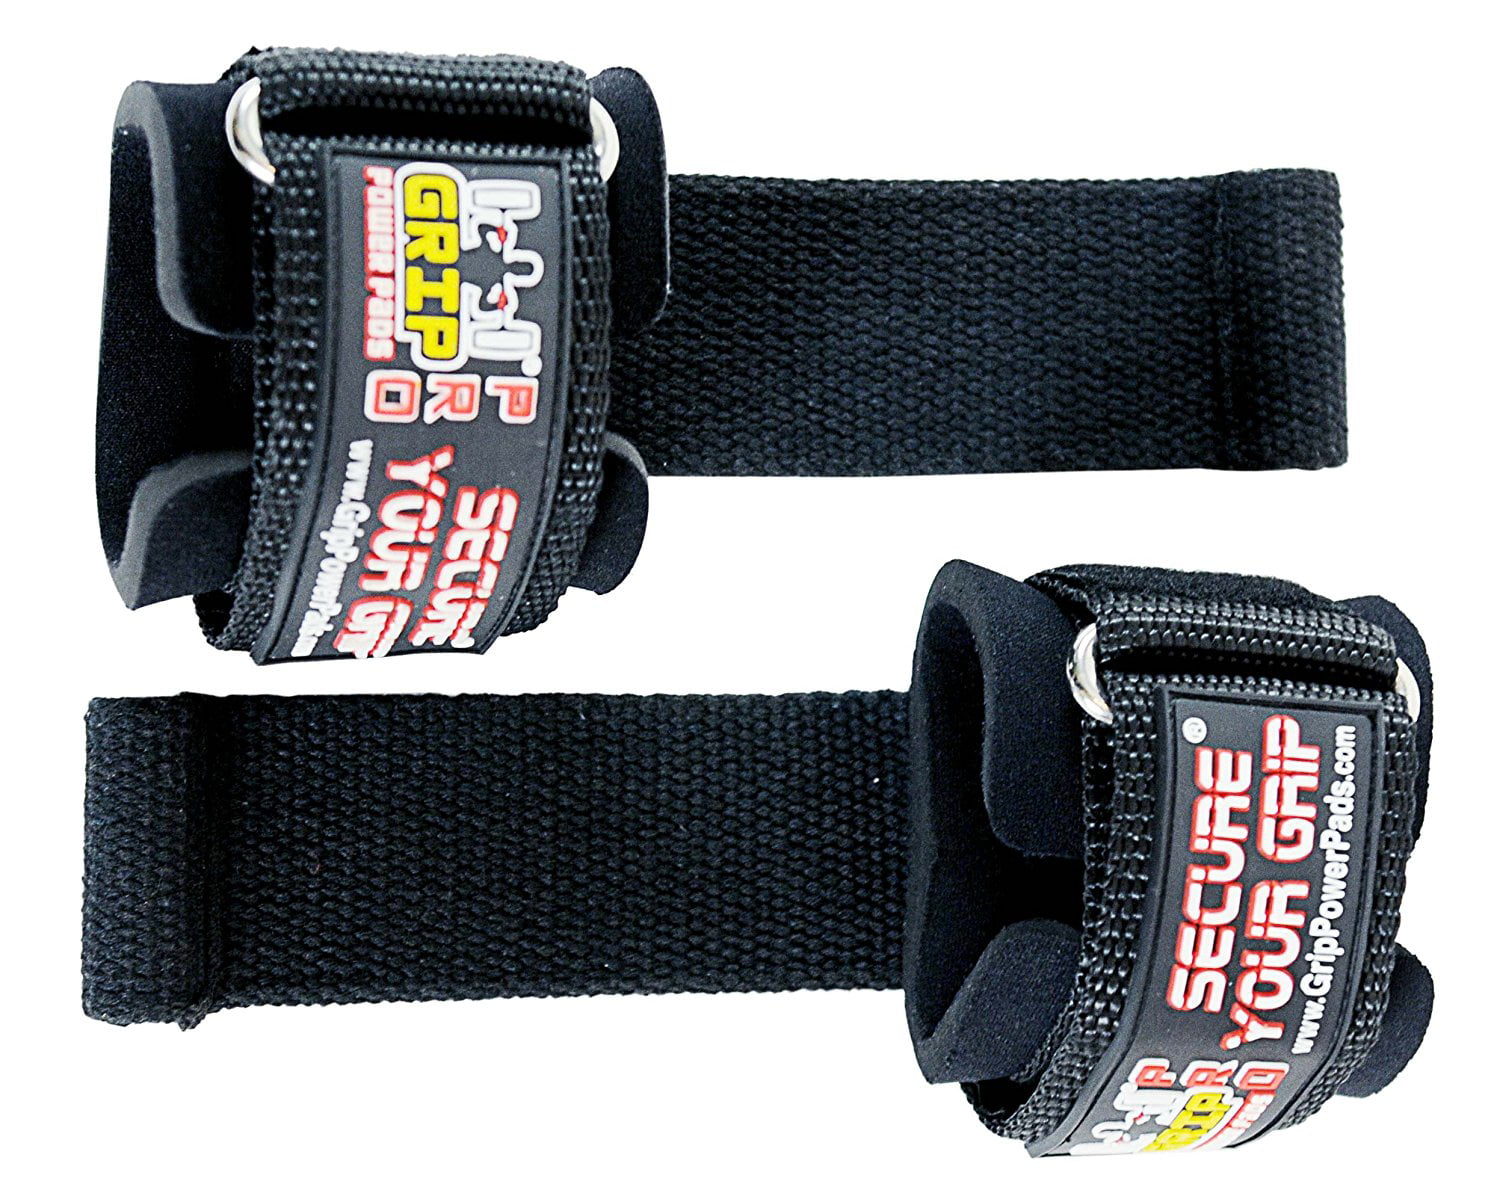 Wyox Professional Lifting Straps and Heavy Duty Hooks | 7mm Think Neoprene Padded Wrist Wraps for Weightlifting Support & Grip - Ideal Gym Gloves